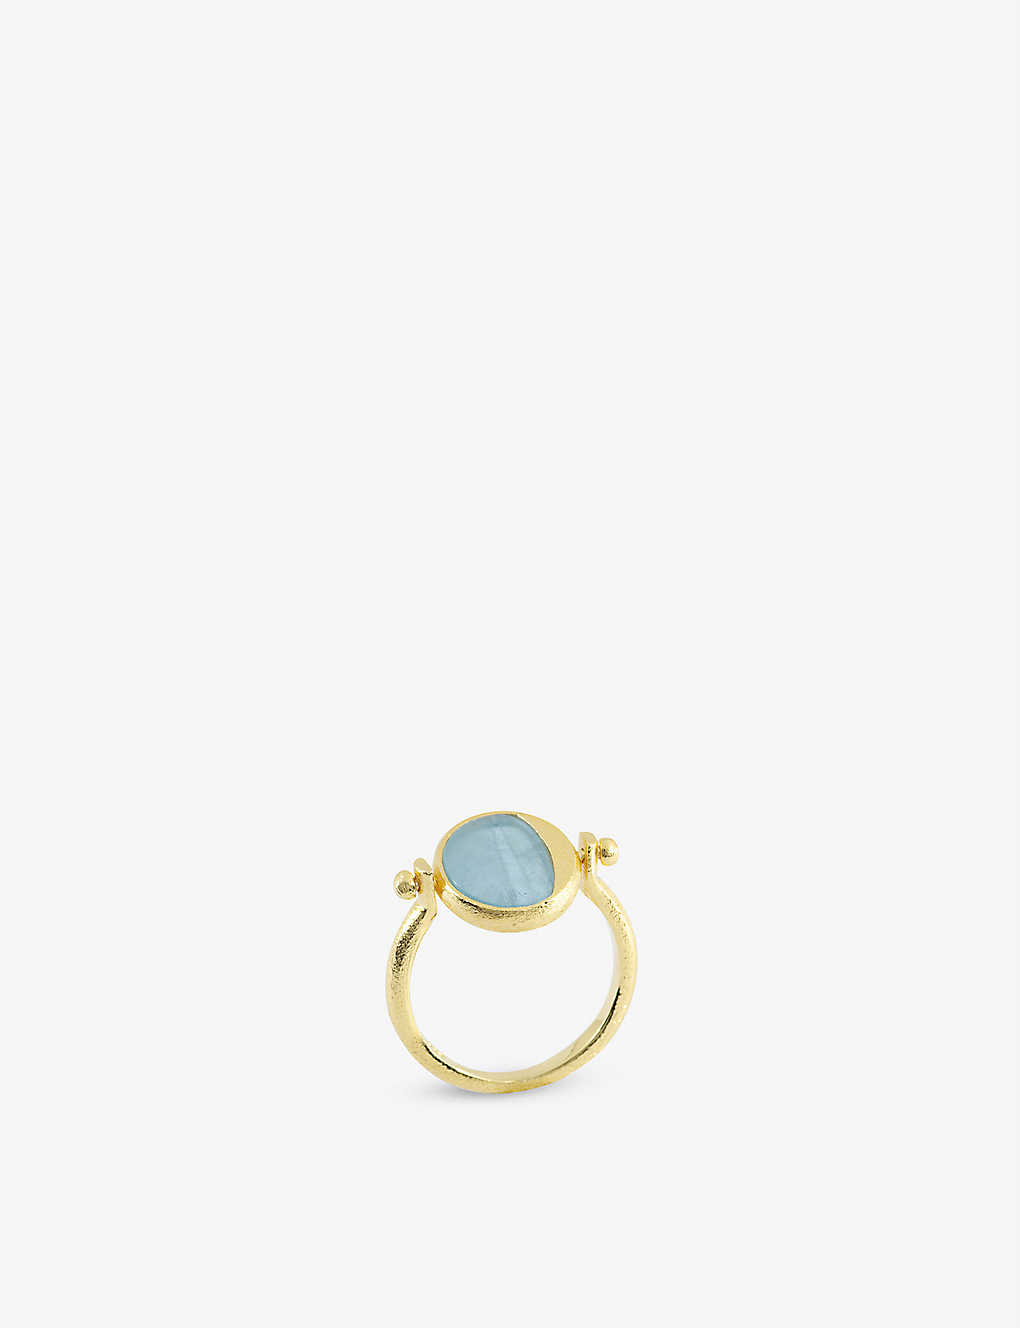 La Maison Couture Niin Luna Flip 18ct Yellow Gold-plated Sterling-silver And Aquamarine Ring